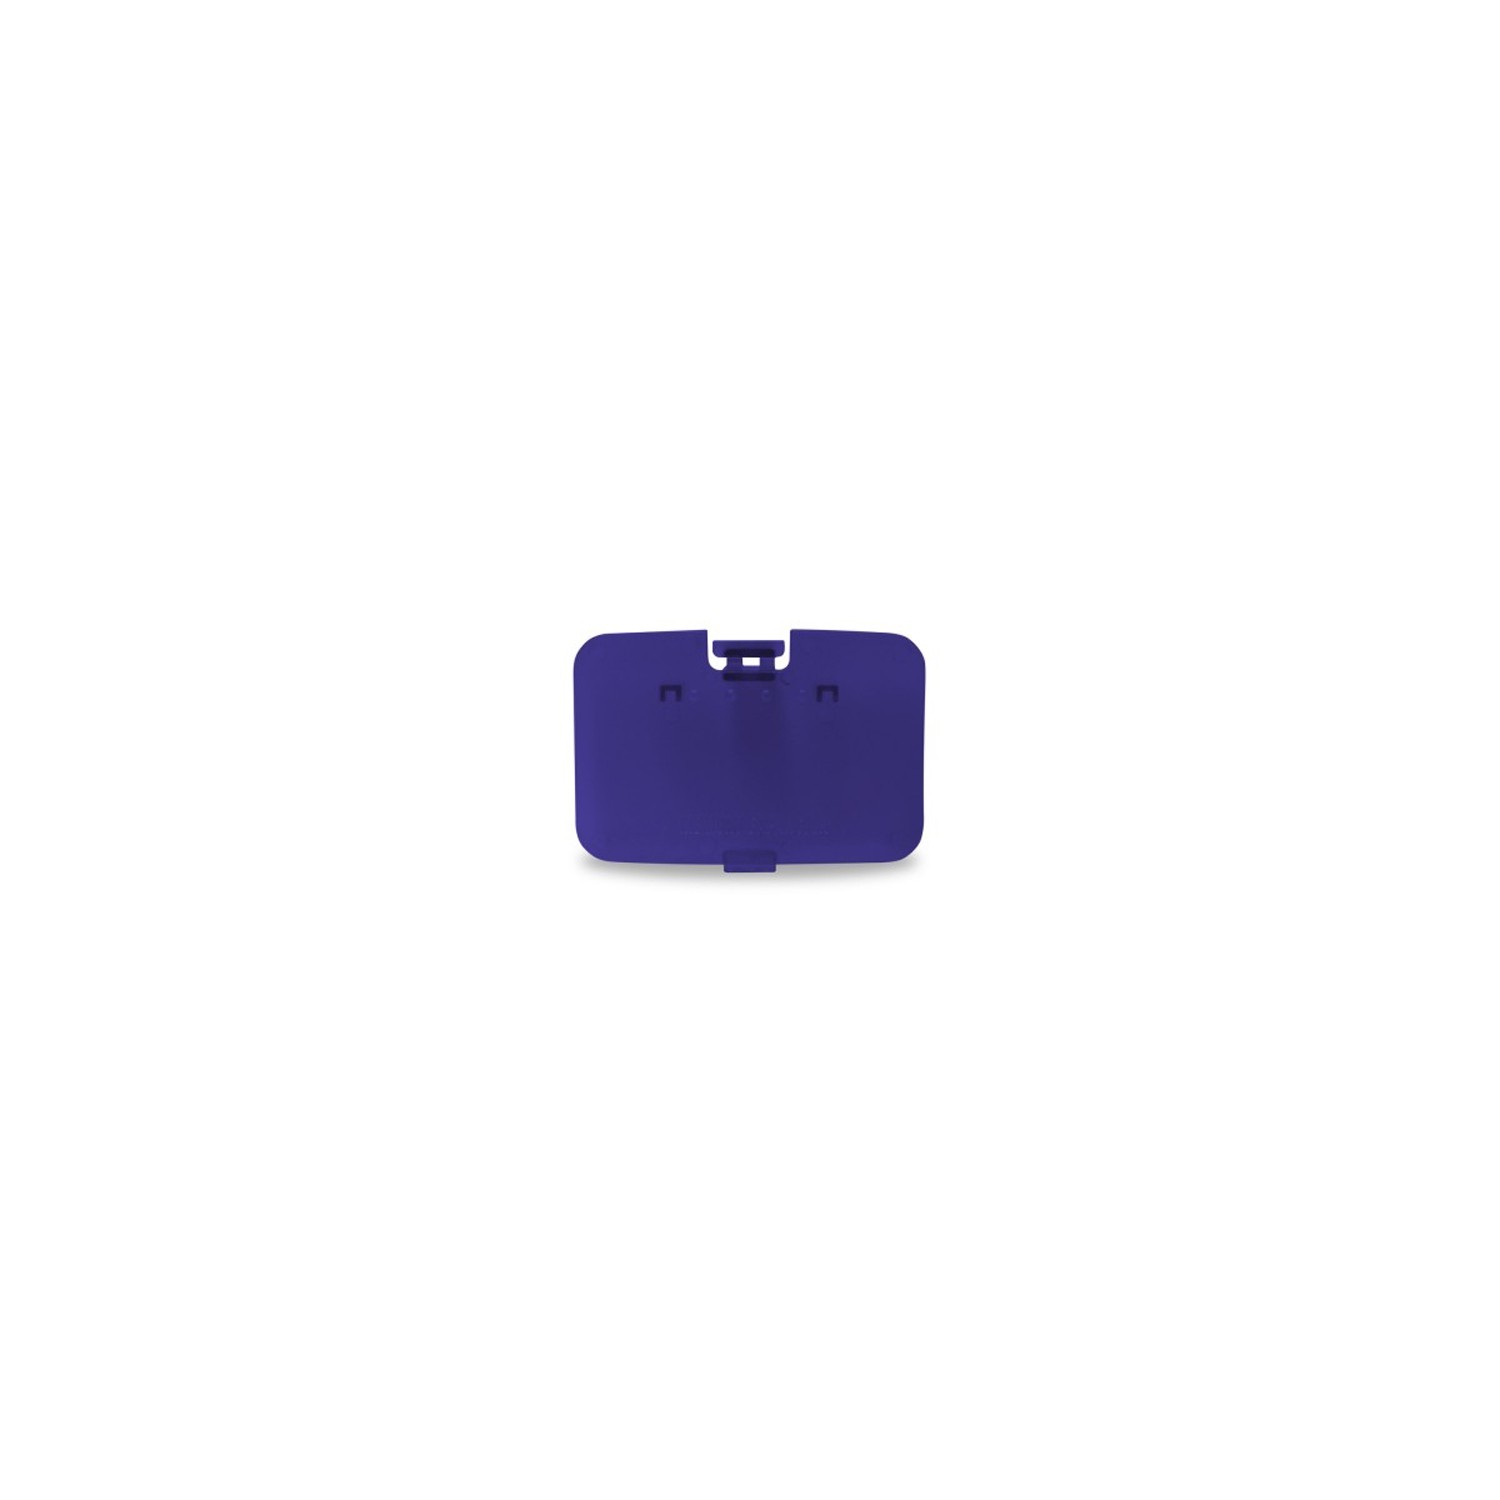 HYPERKIN N64 Replacement Memory Door Cover Atomic Expansion Slot Cover - Nintendo 64 (DN64R-A01-GP) - Purple